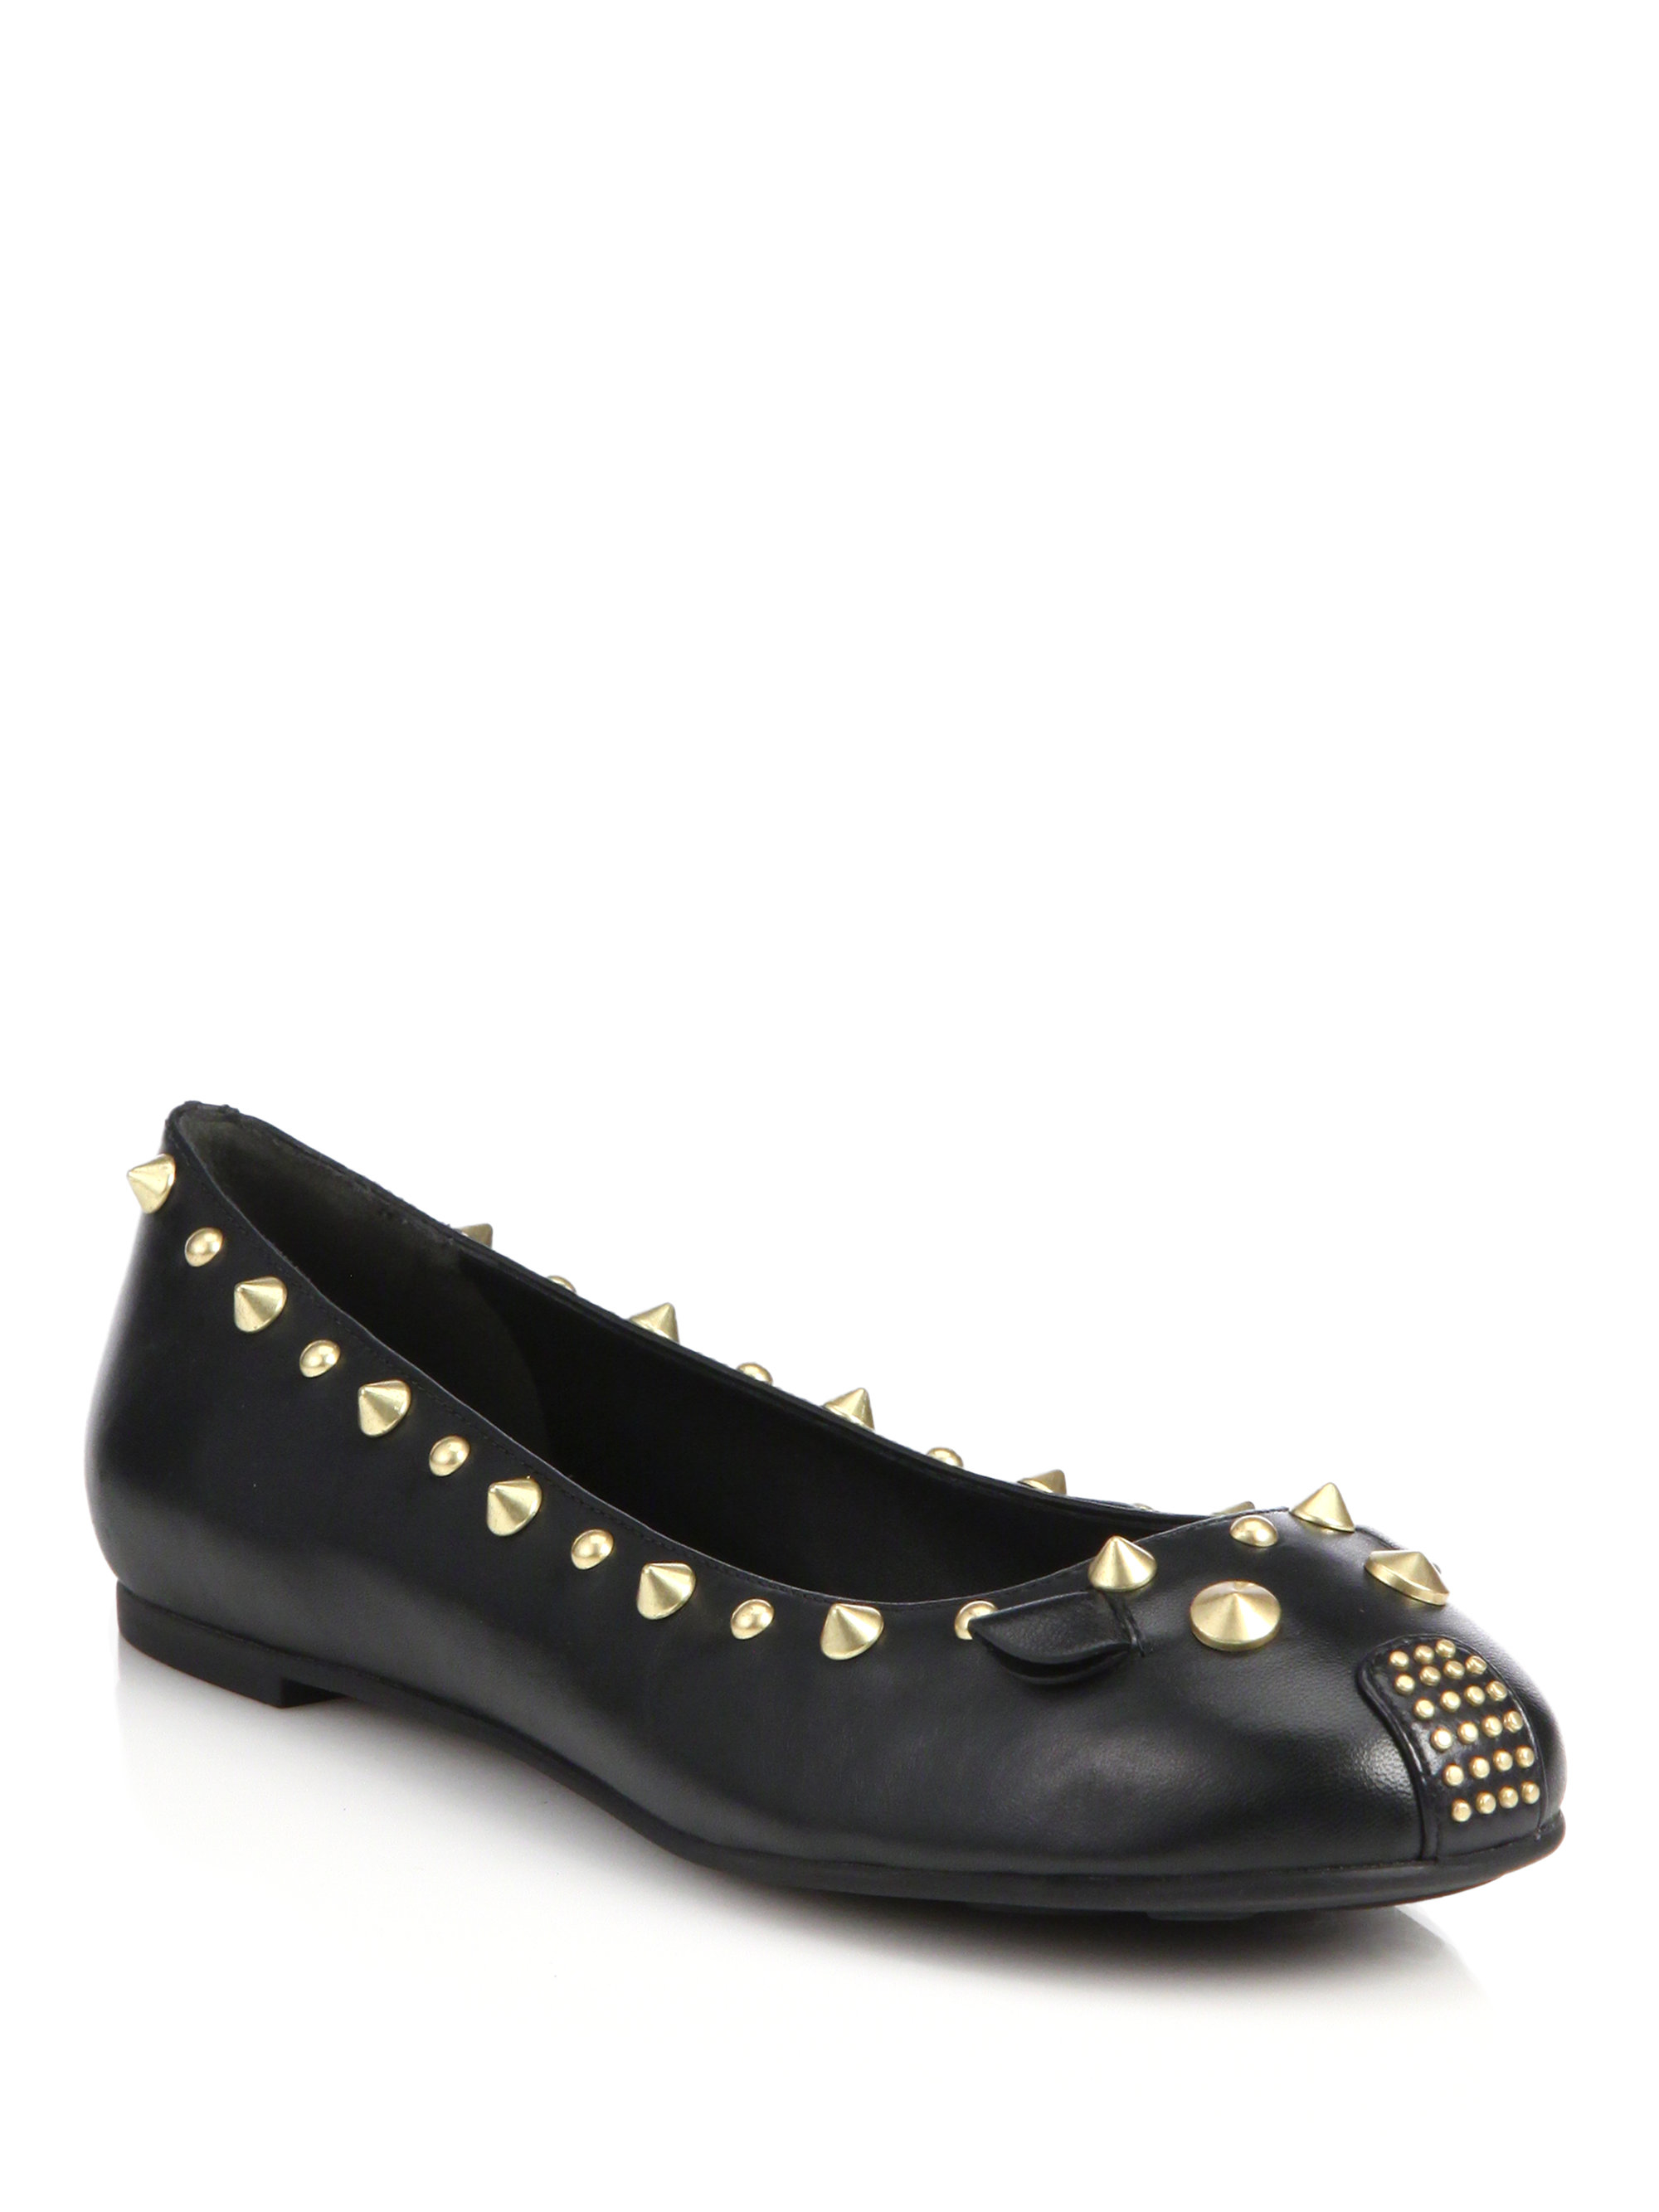 Lyst - Marc By Marc Jacobs Studded Leather Mouse Ballet Flats in Black